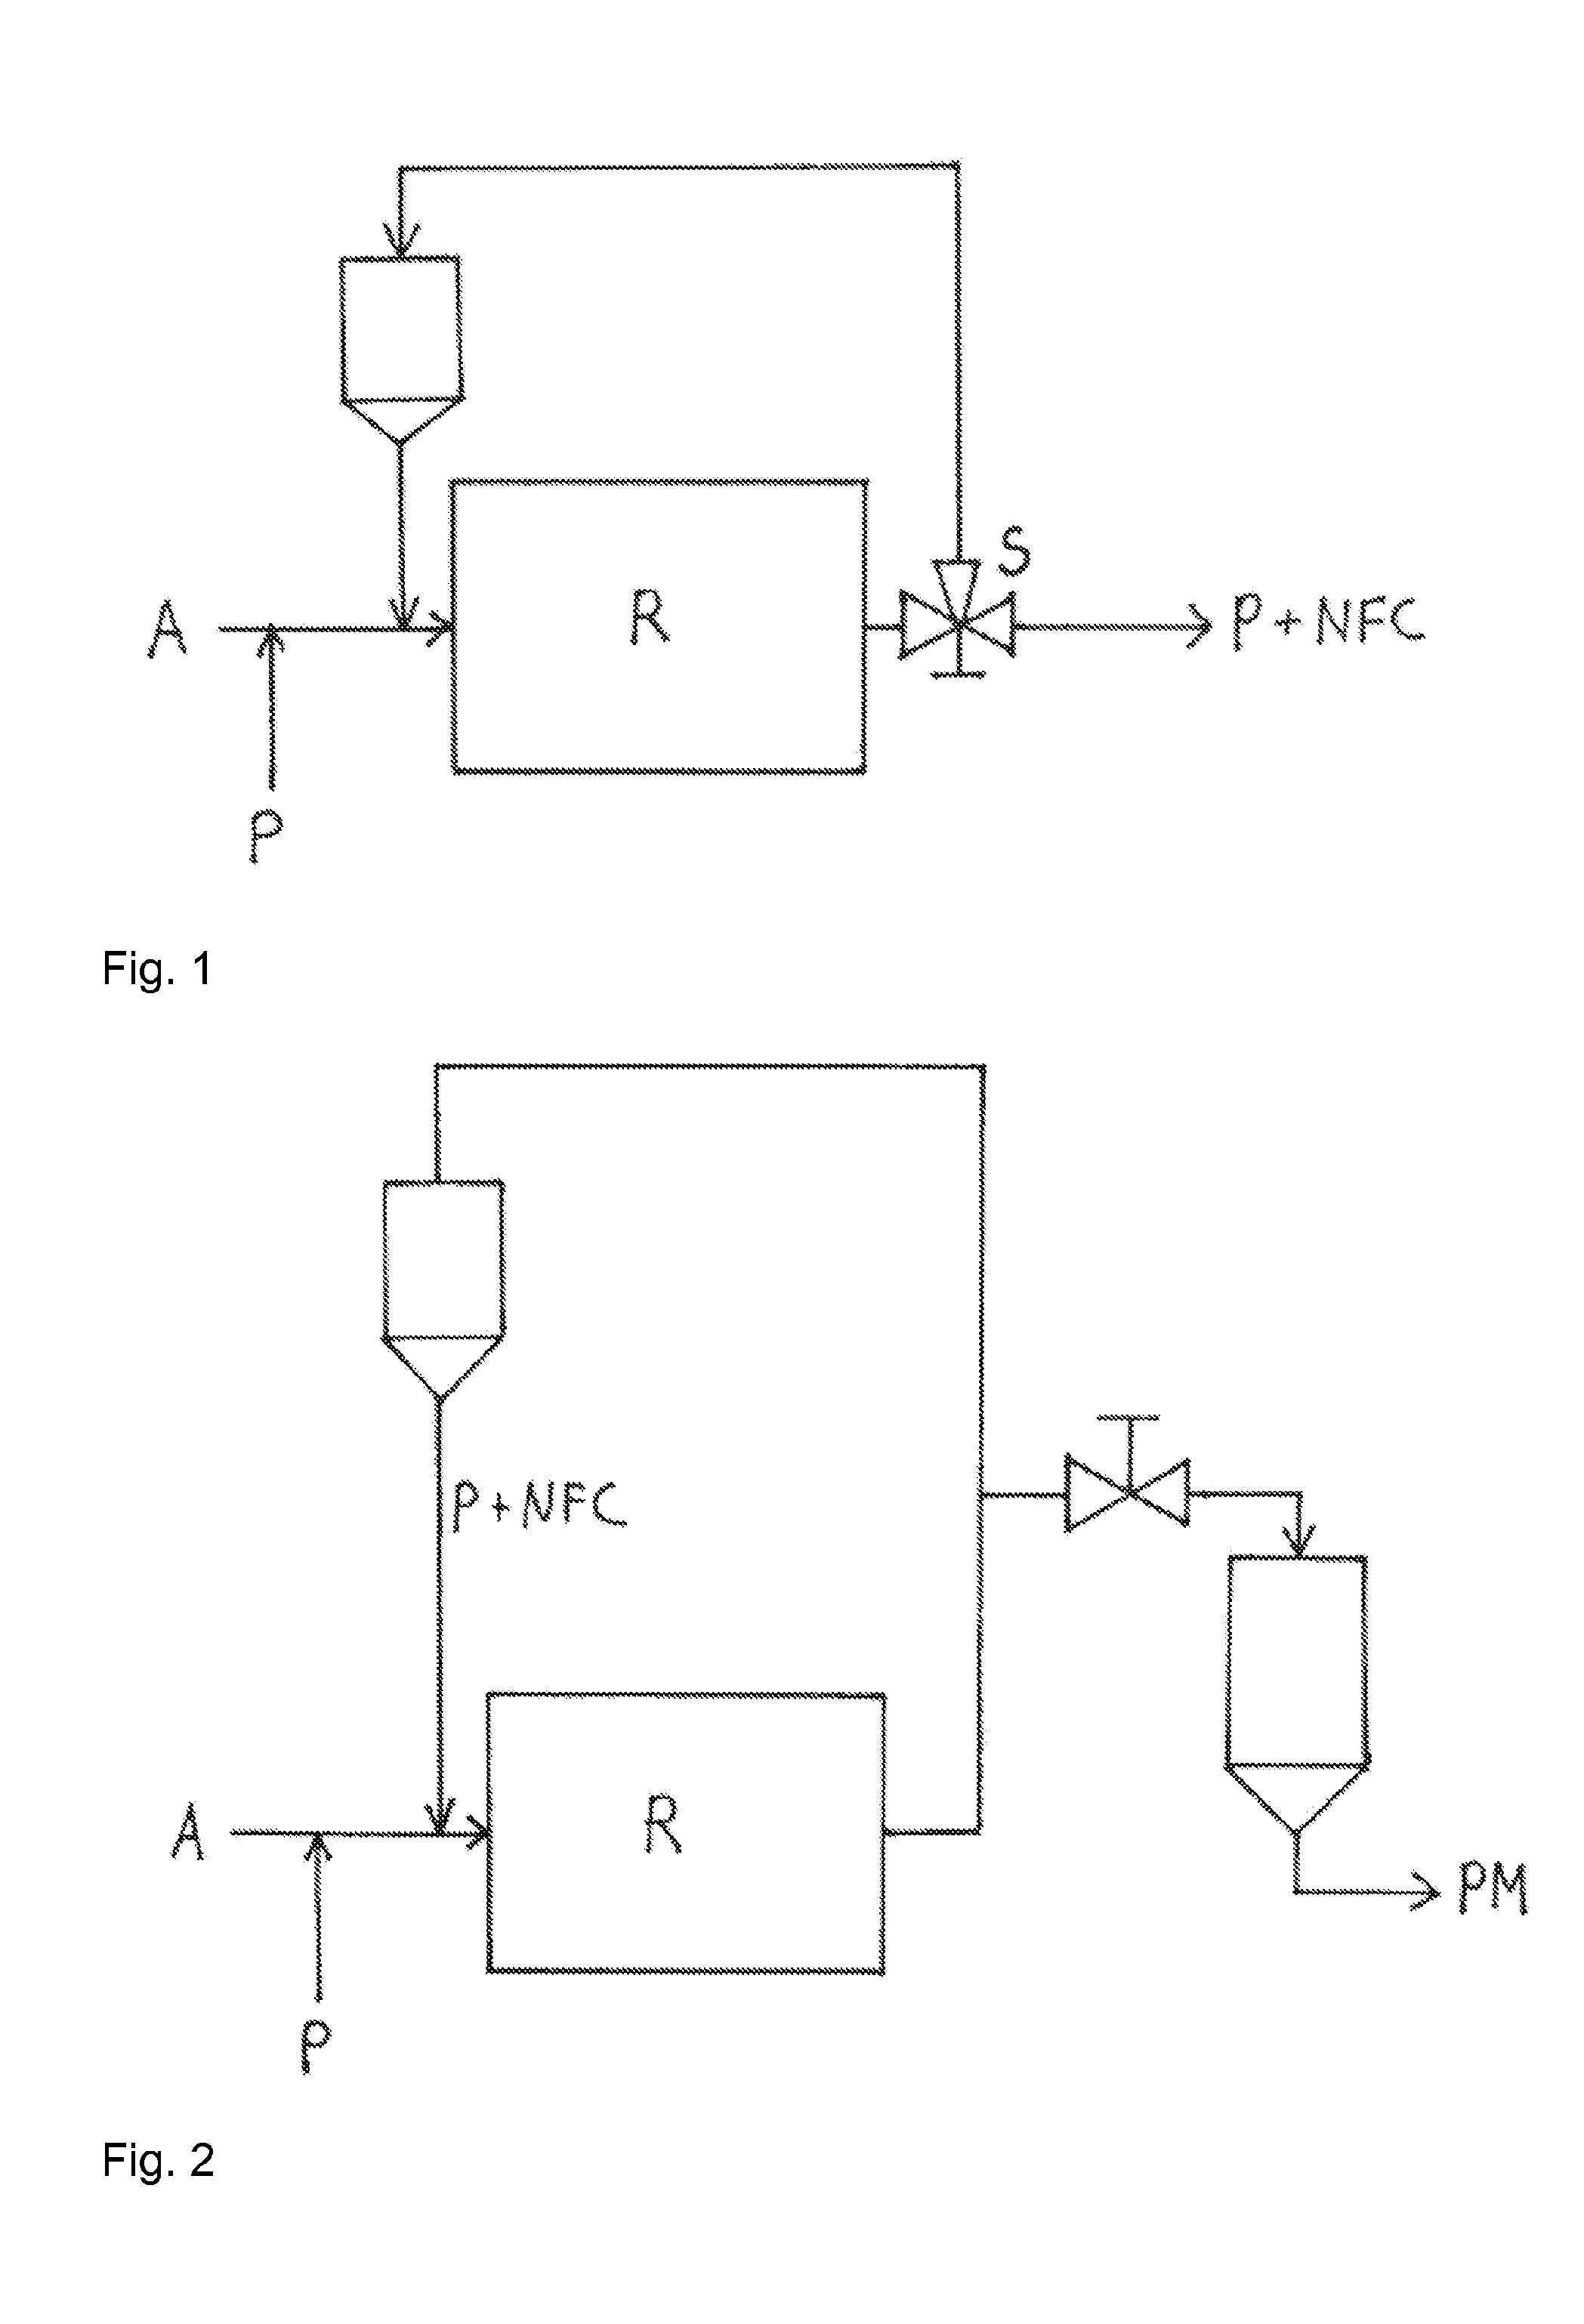 Method for making nanofibrillar cellulose and for making a paper product